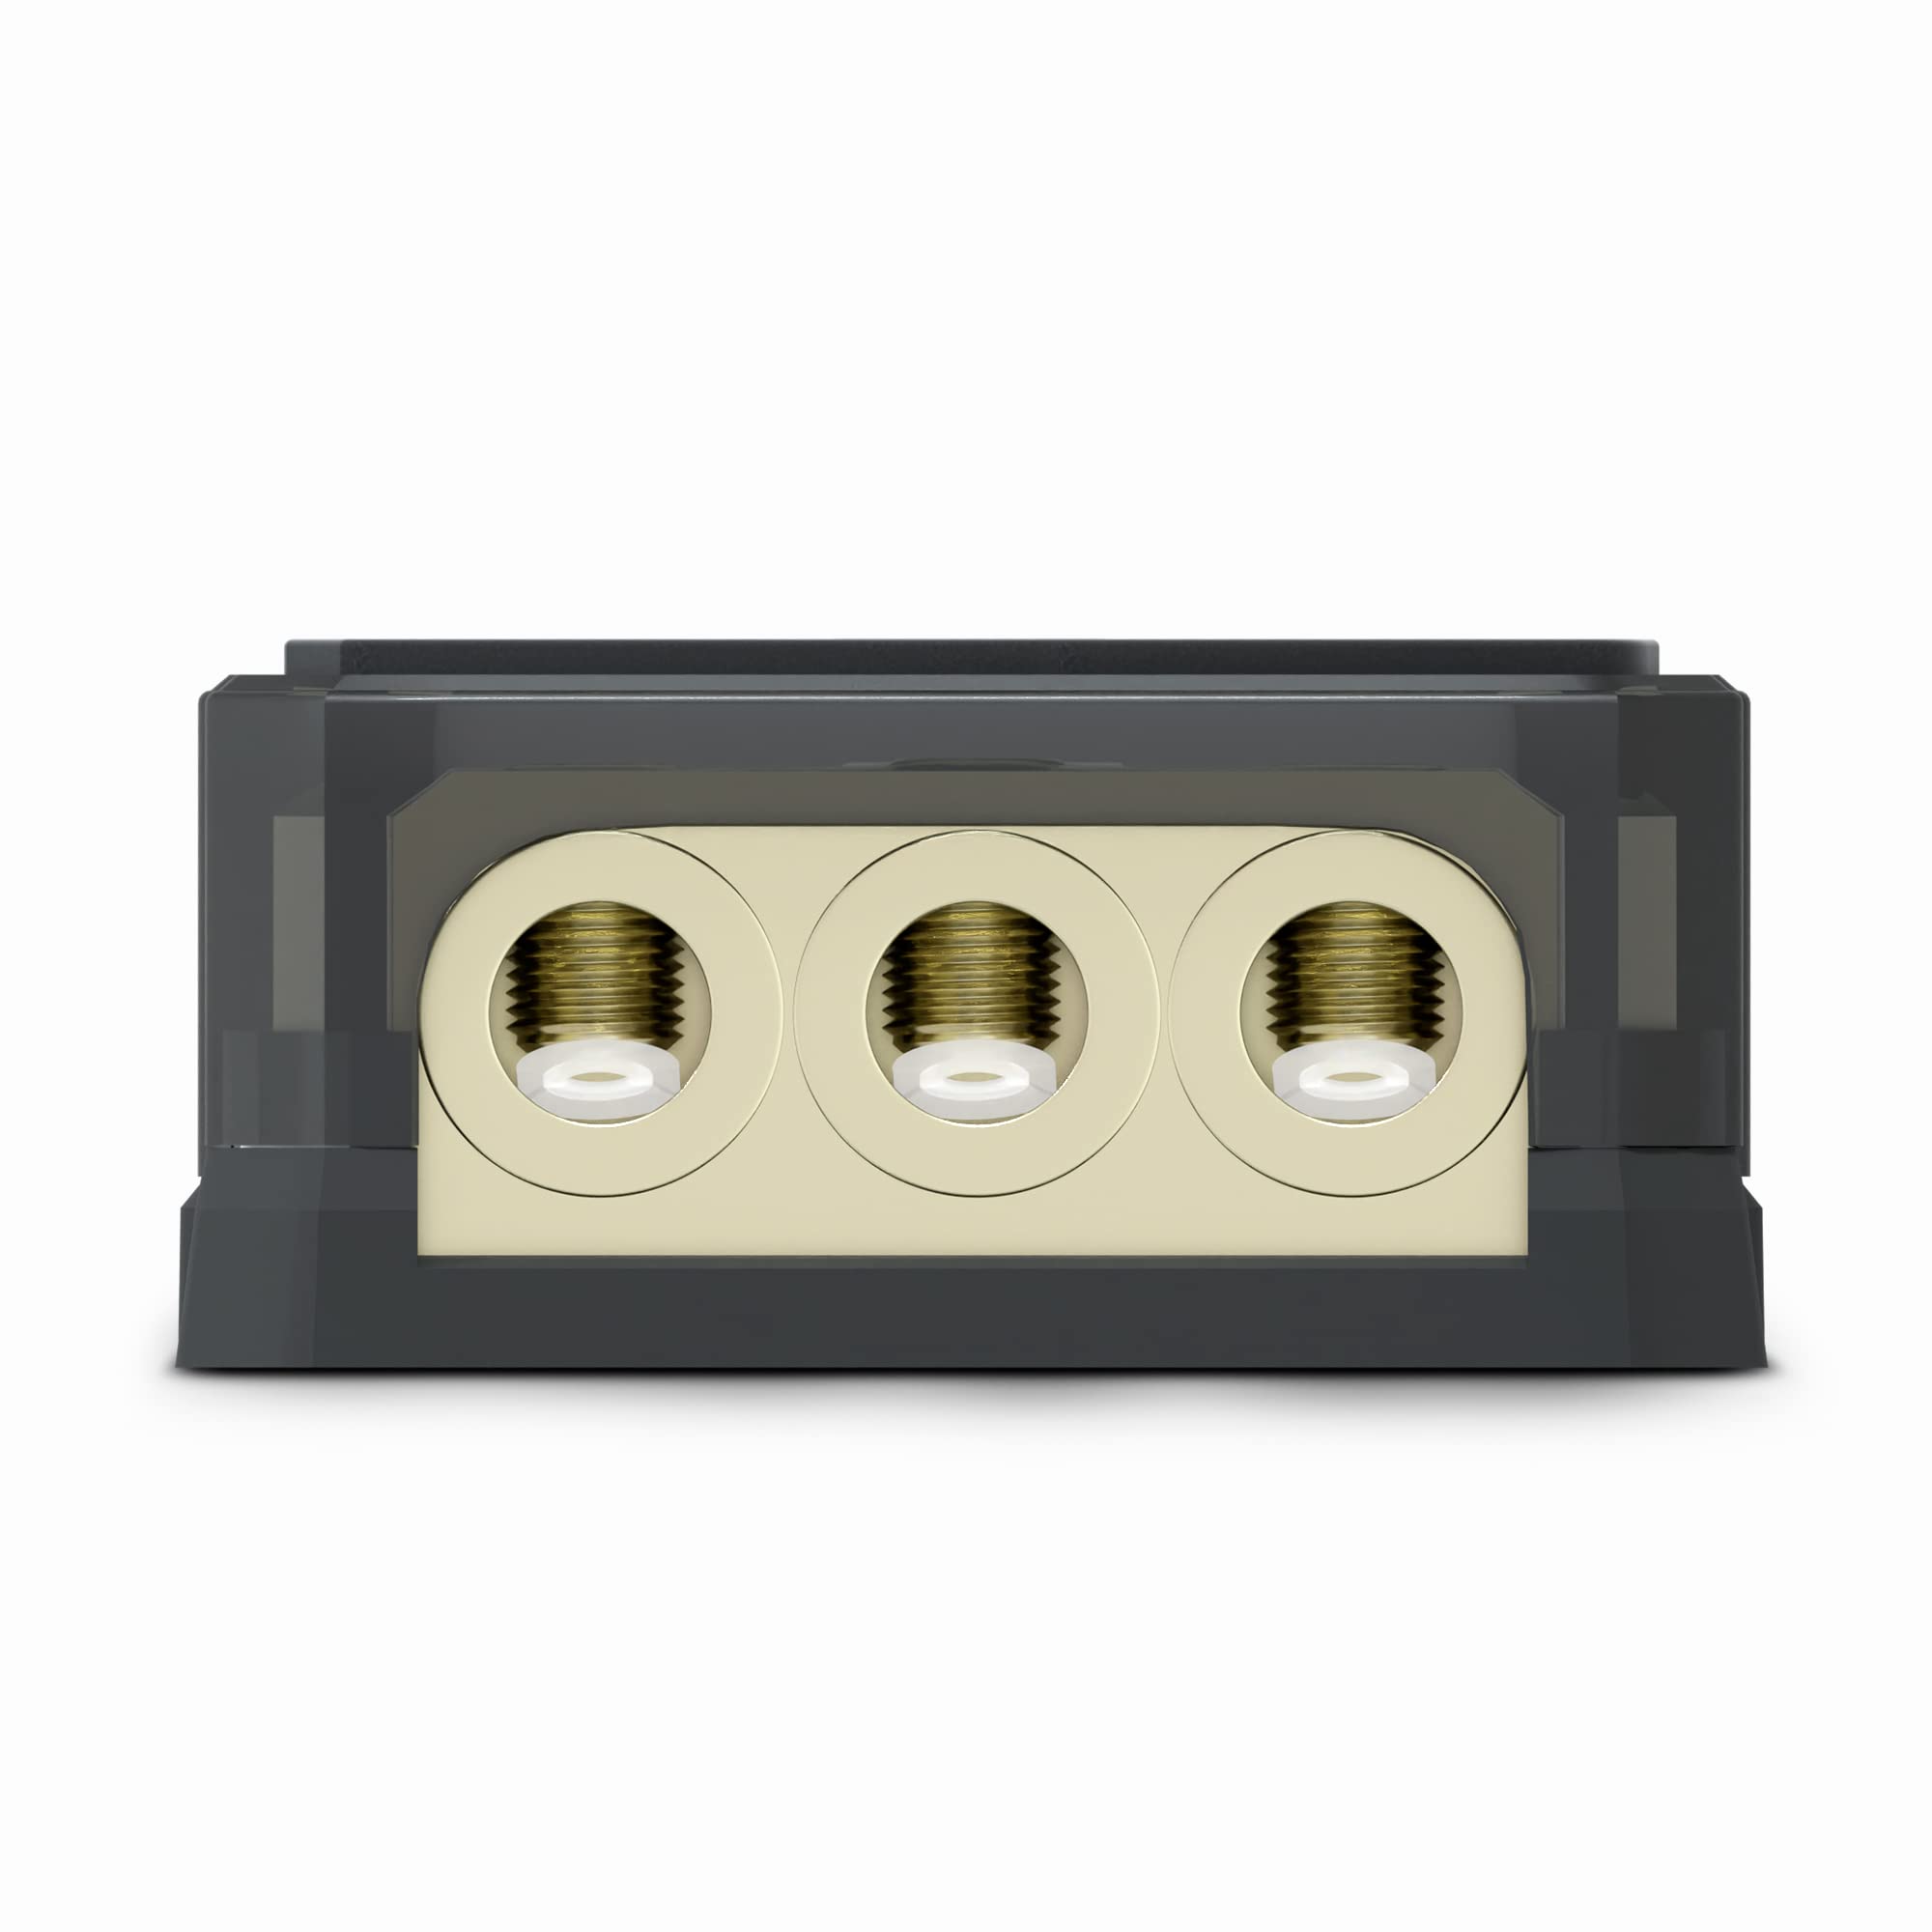 DS18 DB1030 Distribution Ground Block - 1 x 0GA in/ 3 x 0GA Out, Nickle Plated Internal Materials, High-Strength Heat Resistant Plastic Housing, Oversized Screws for Secure Connections (1 in 3 Out)